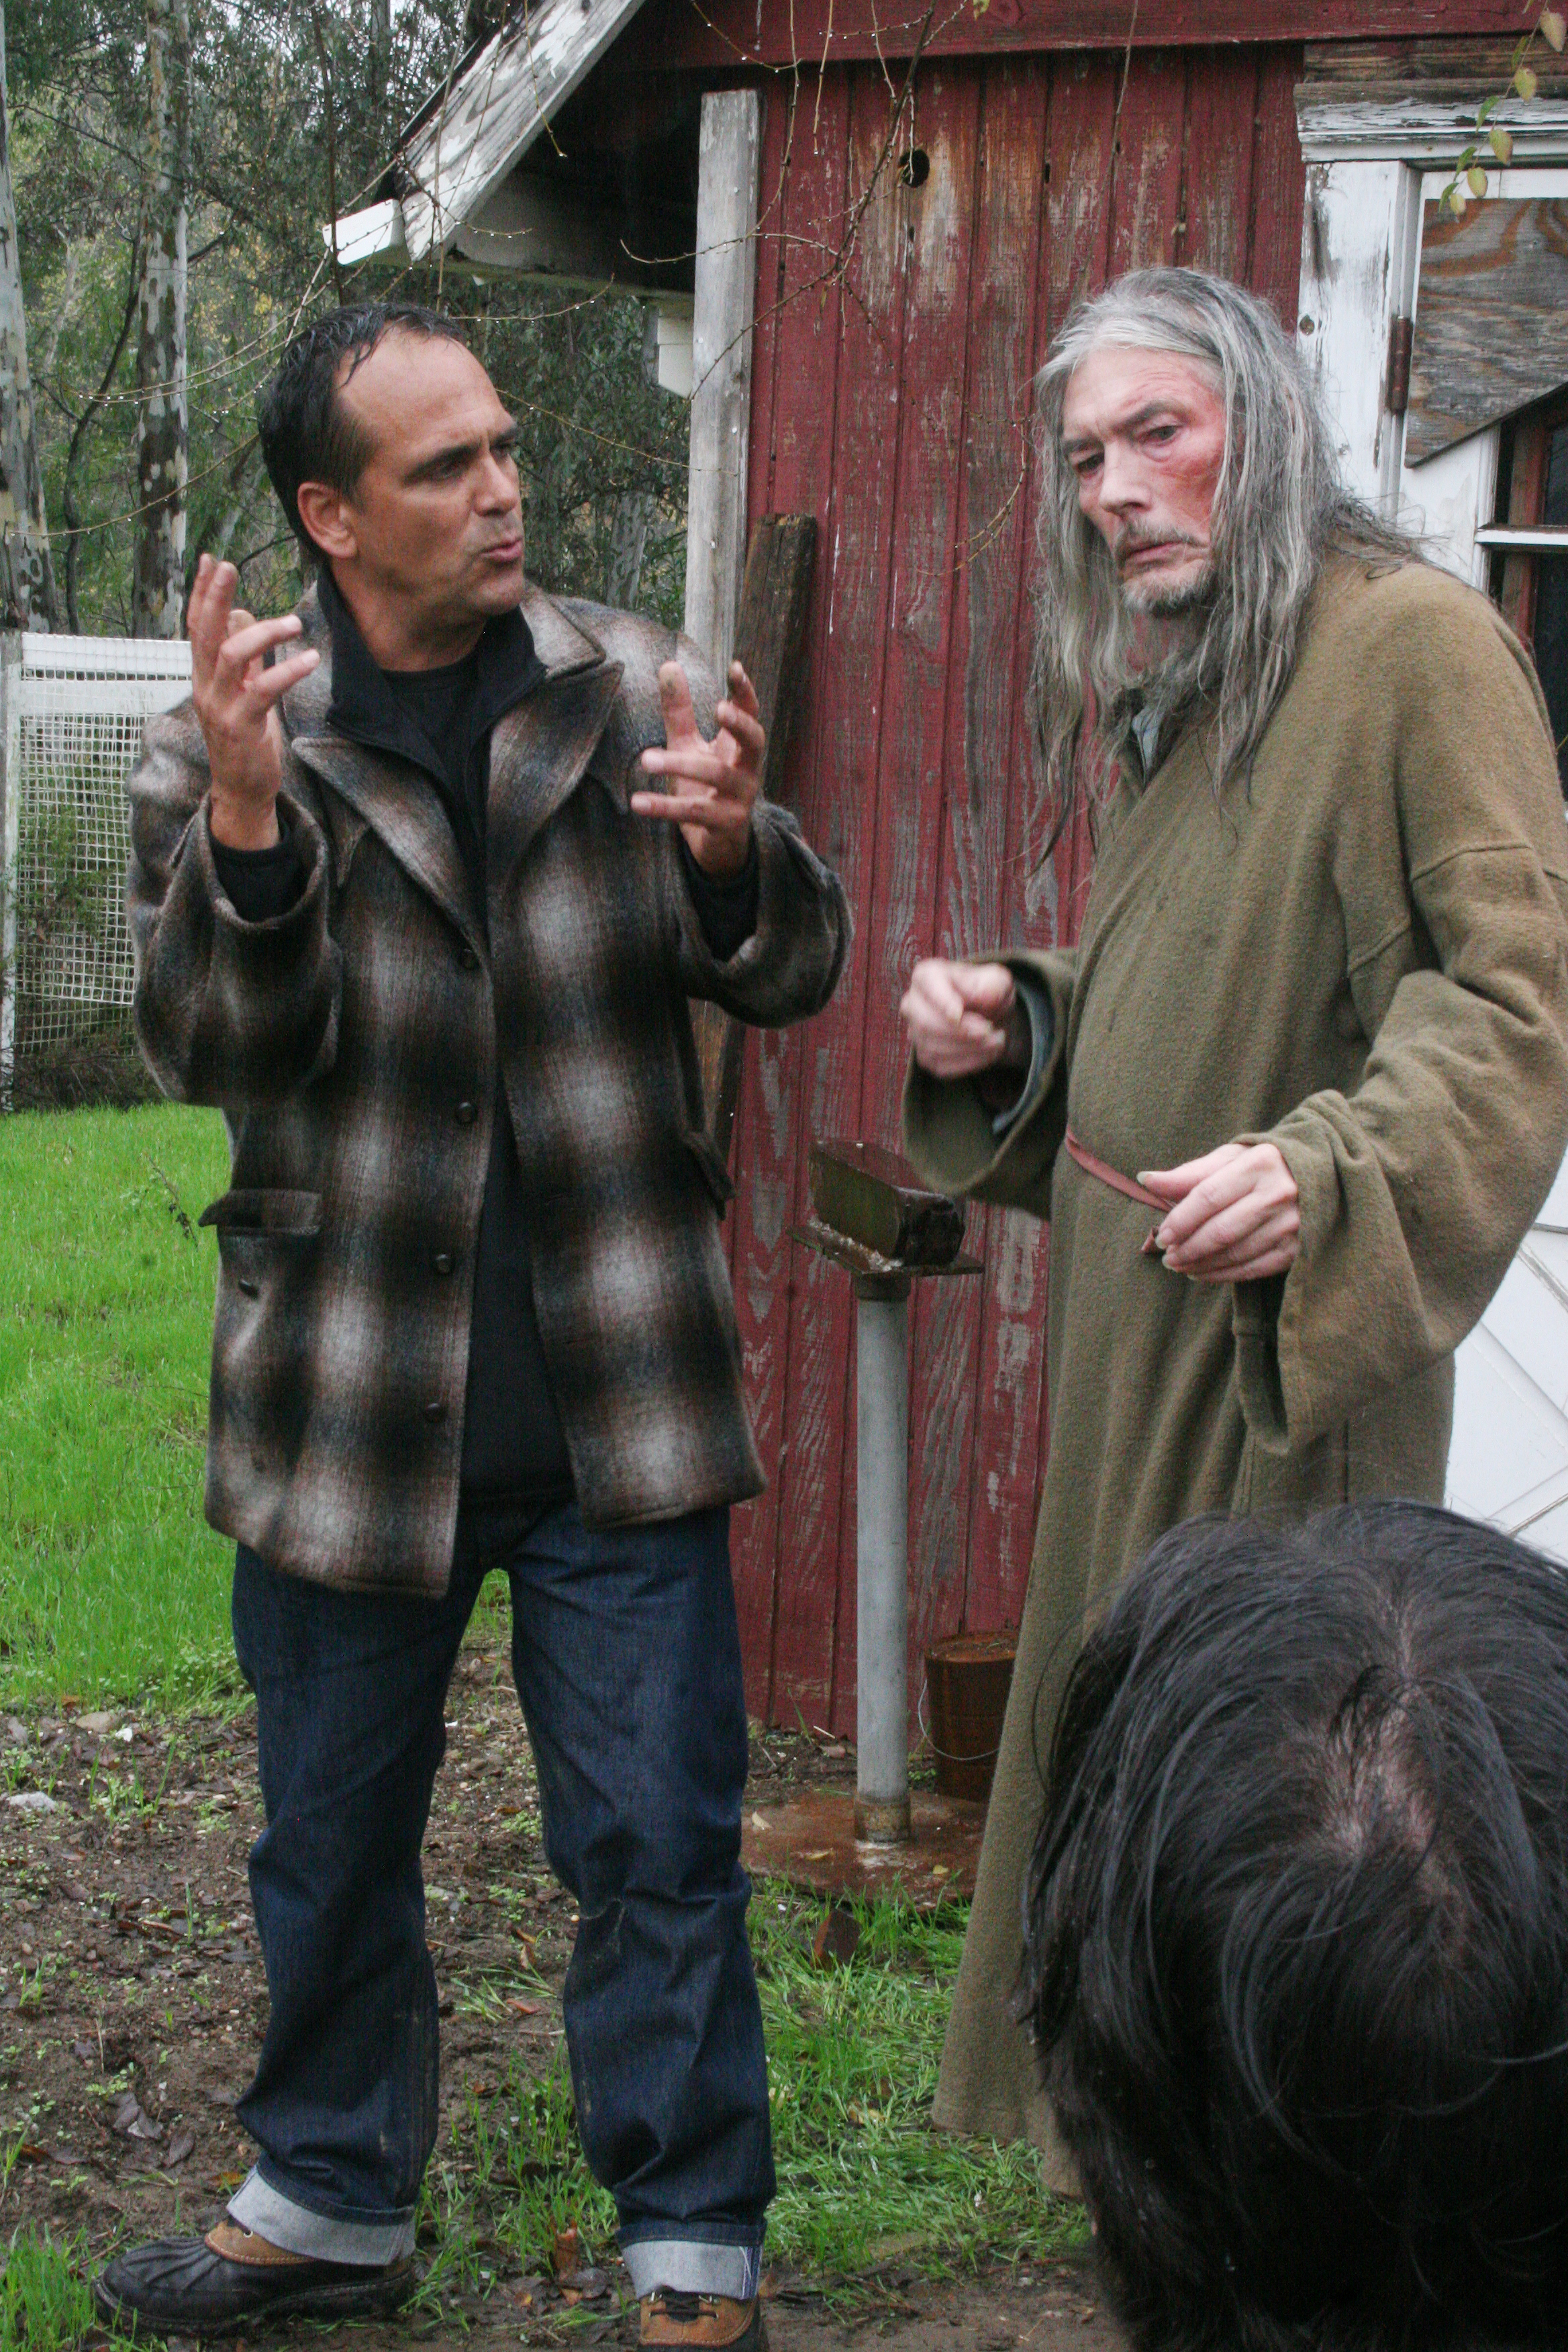 Behind the scenes from the movie Black Asylum,directed by Robert Rusler. Robert Rusler goes over a scene with Billy Drago.